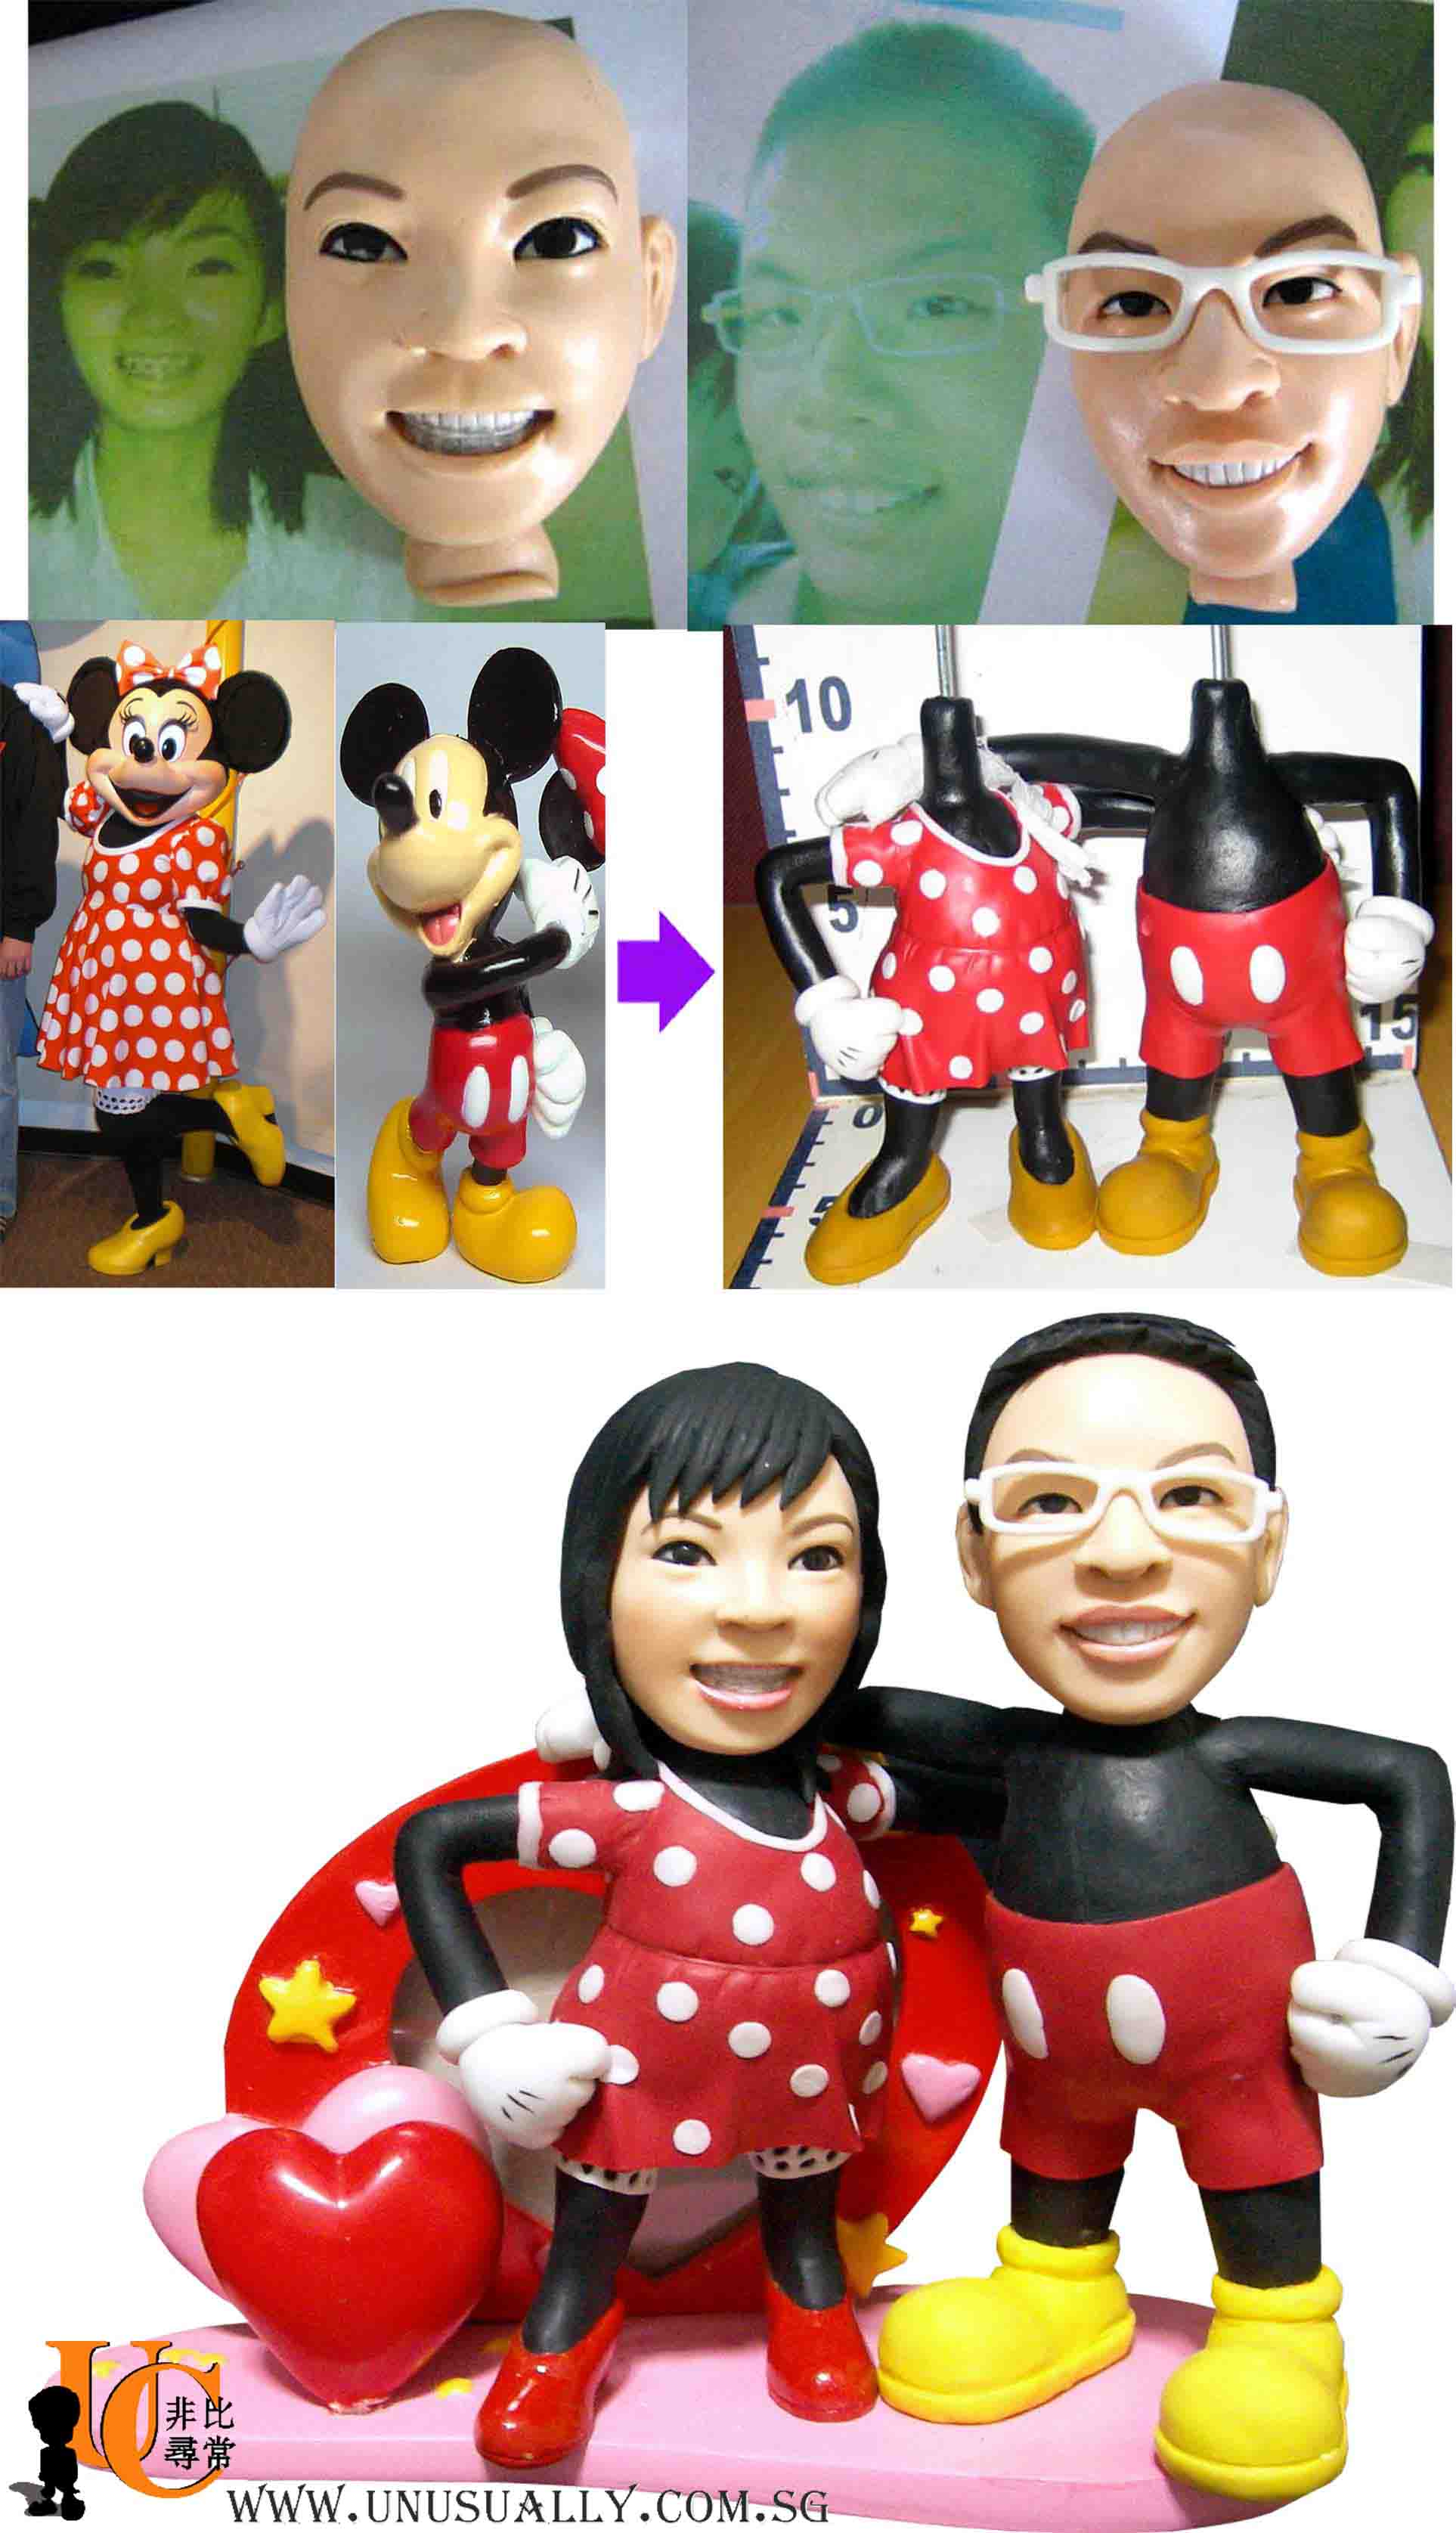 Customized 3D Caricature Mickey & Minnie Couple Clay Figurines